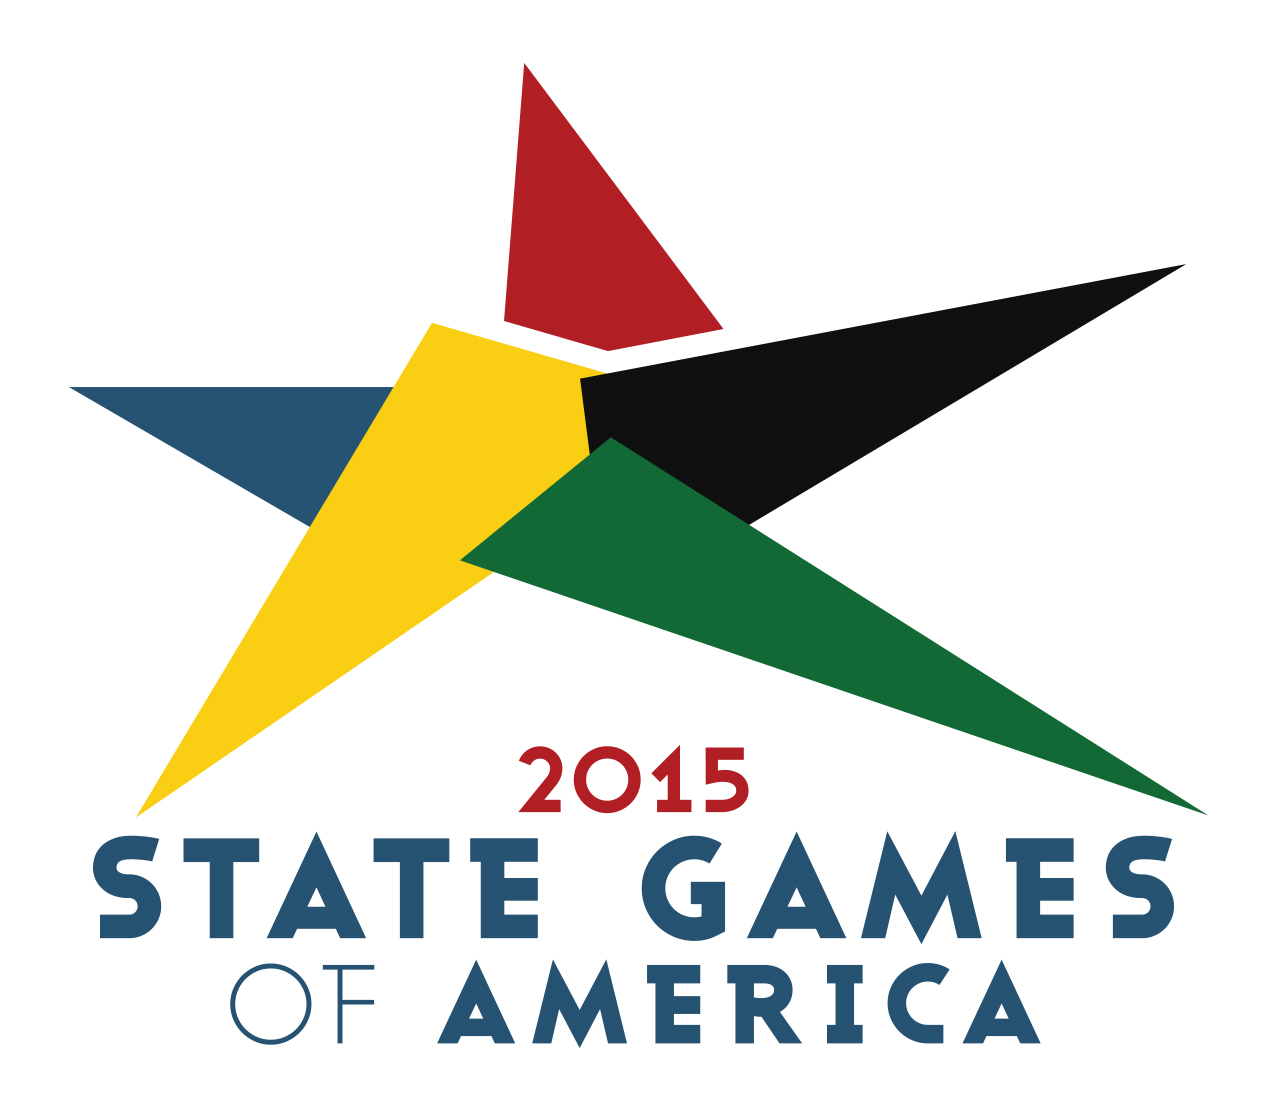 CoJMC students to produce live coverage of 2015 State Games of America